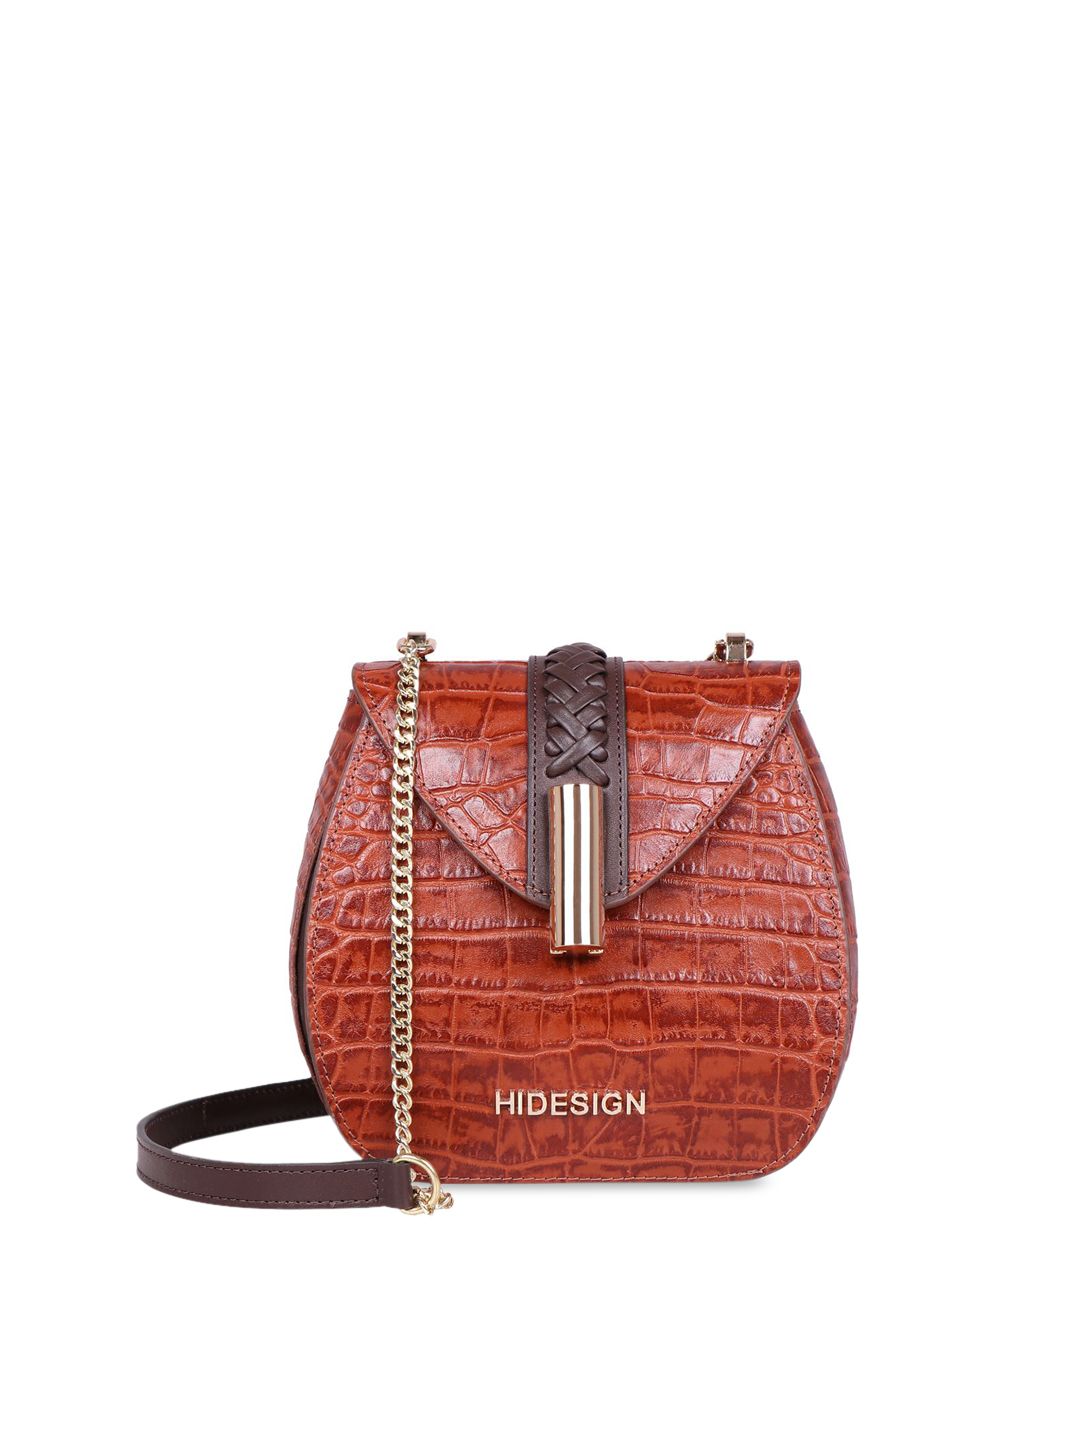 Hidesign Women Tan Textured Leather Sling Bag Price in India